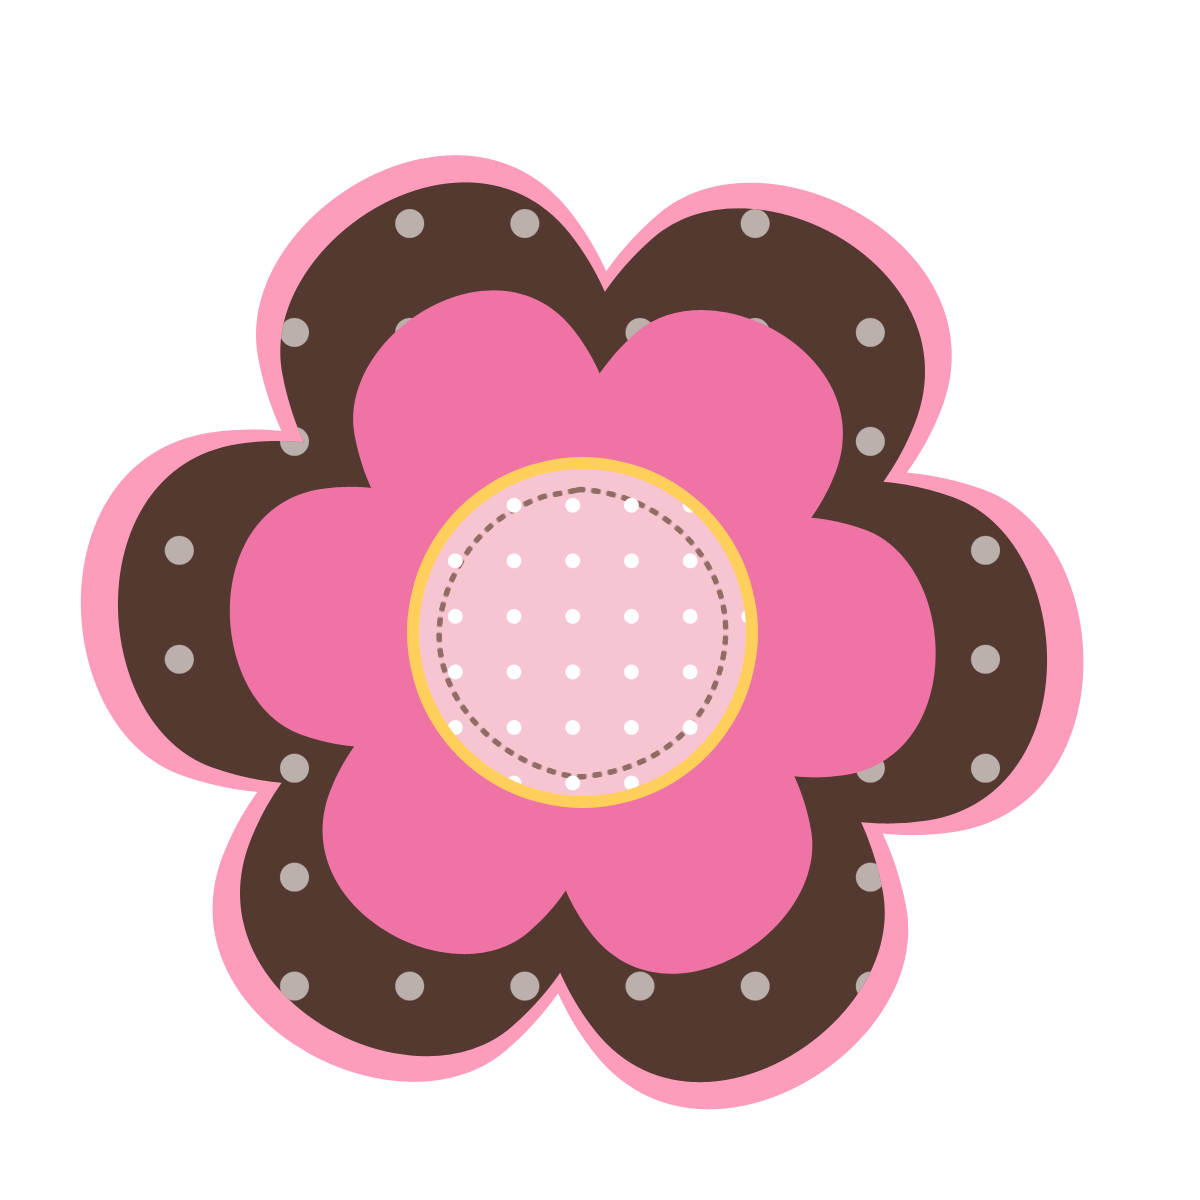  fl ers f. Gifts clipart flower